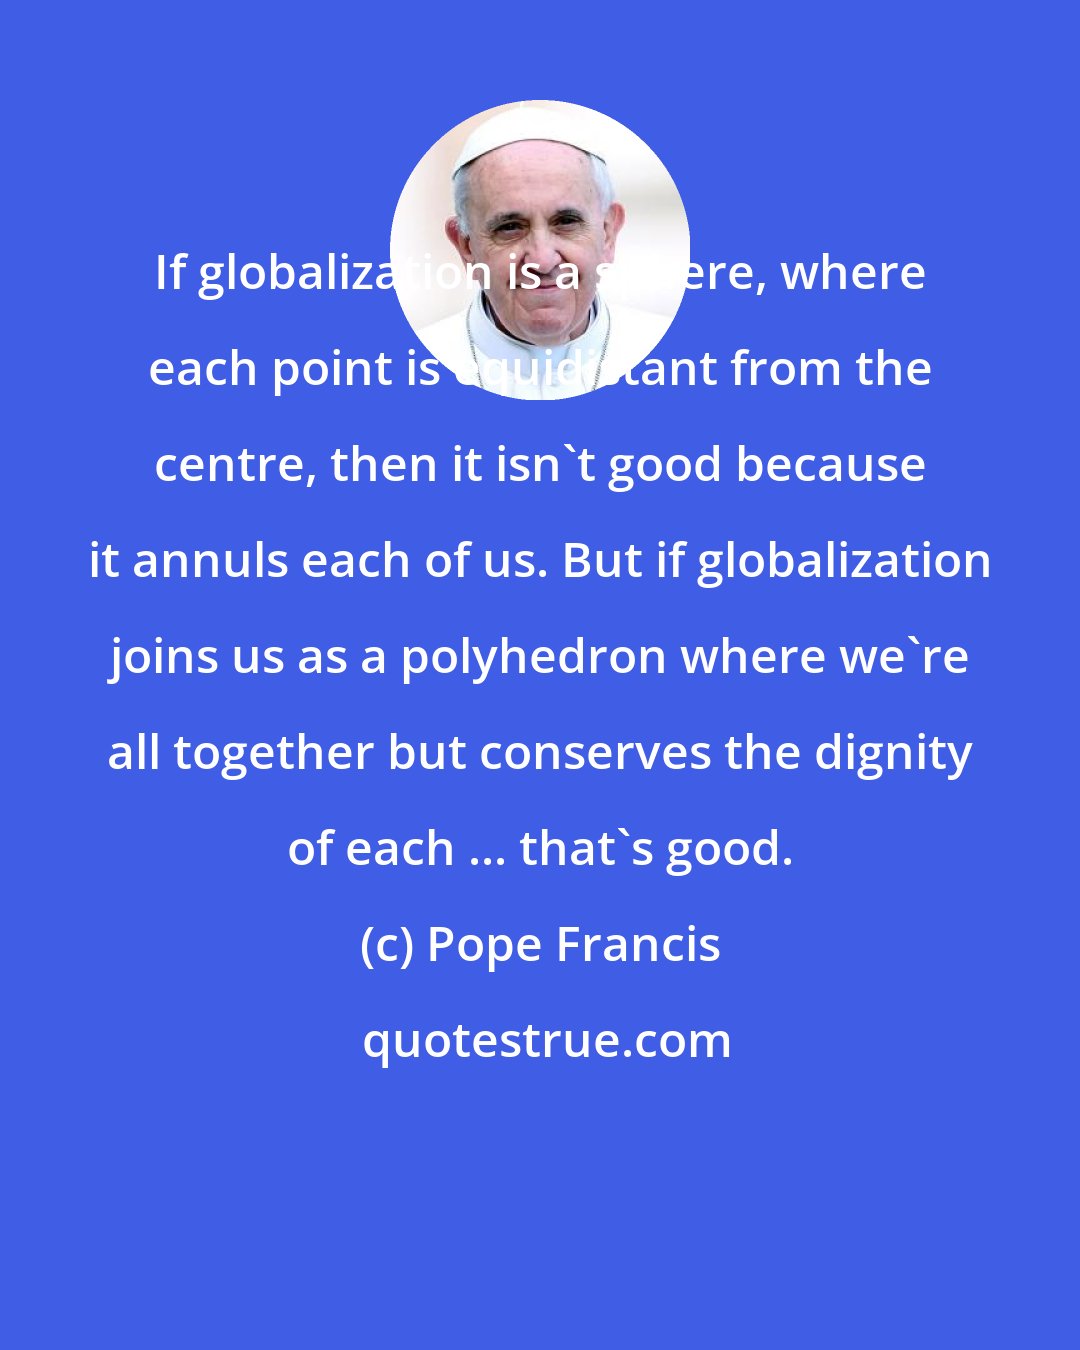 Pope Francis: If globalization is a sphere, where each point is equidistant from the centre, then it isn't good because it annuls each of us. But if globalization joins us as a polyhedron where we're all together but conserves the dignity of each ... that's good.